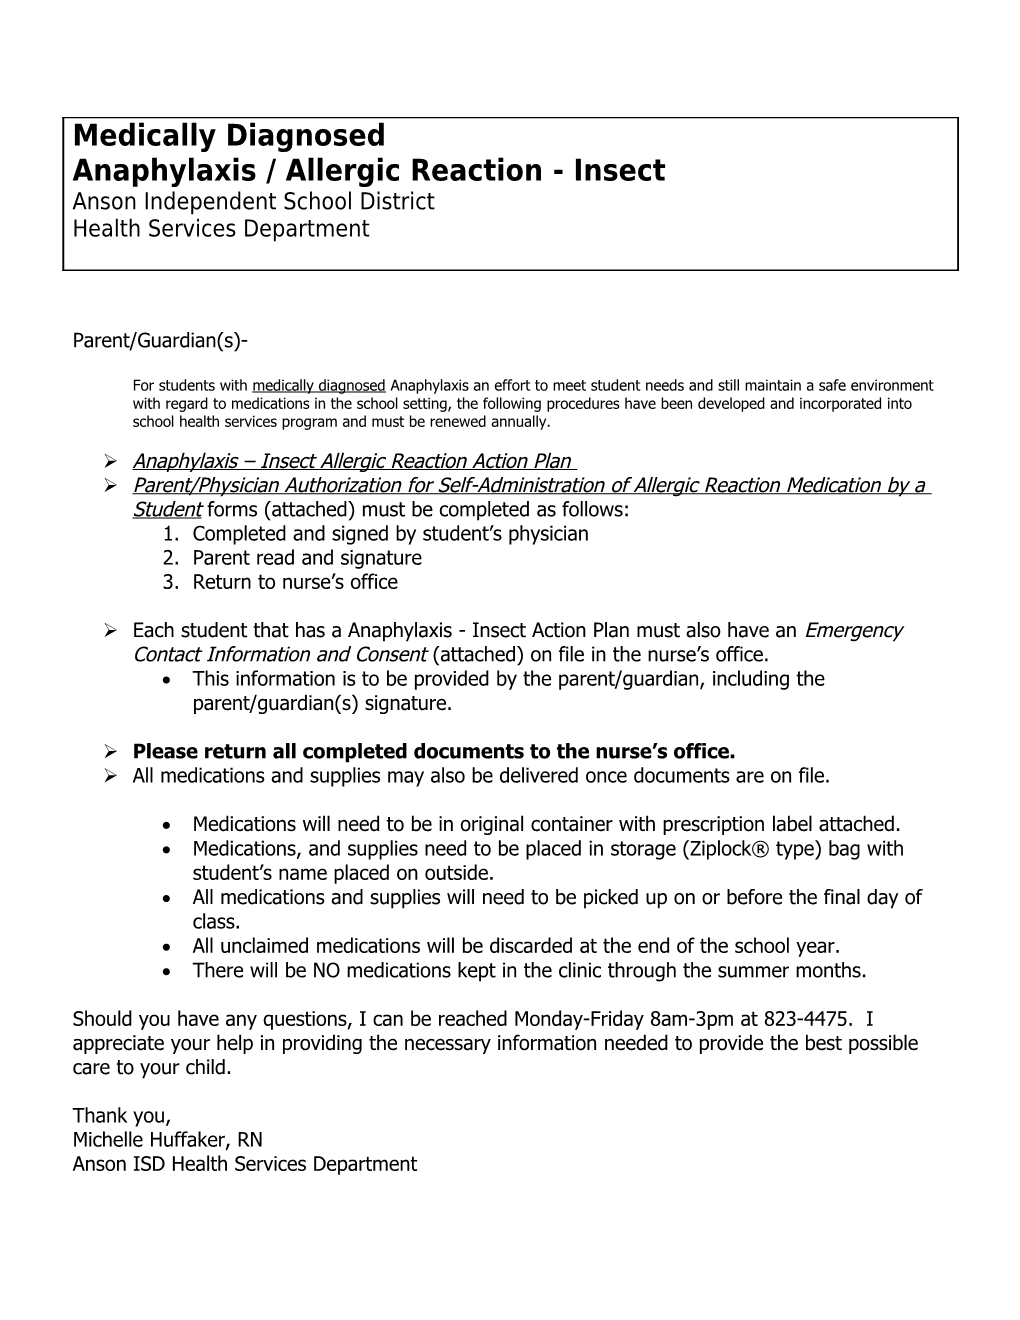 Anaphylaxis Insect Allergic Reaction Action Plan